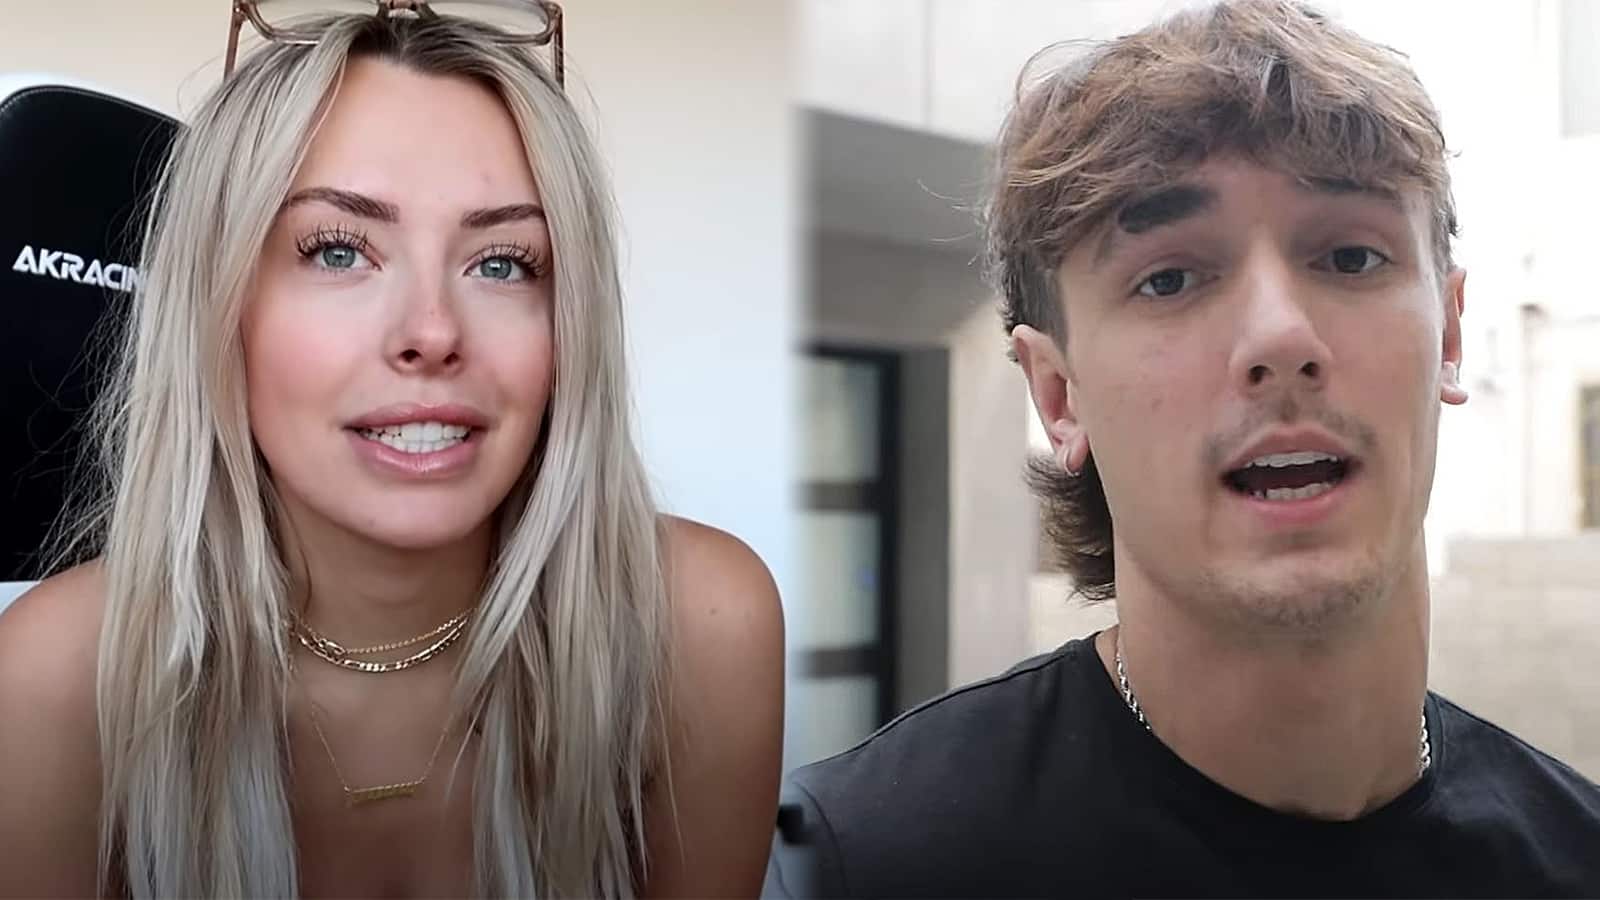 Corinna Kopf denies she slept with Bryce Hall after “outlandish  accusations” - Dexerto